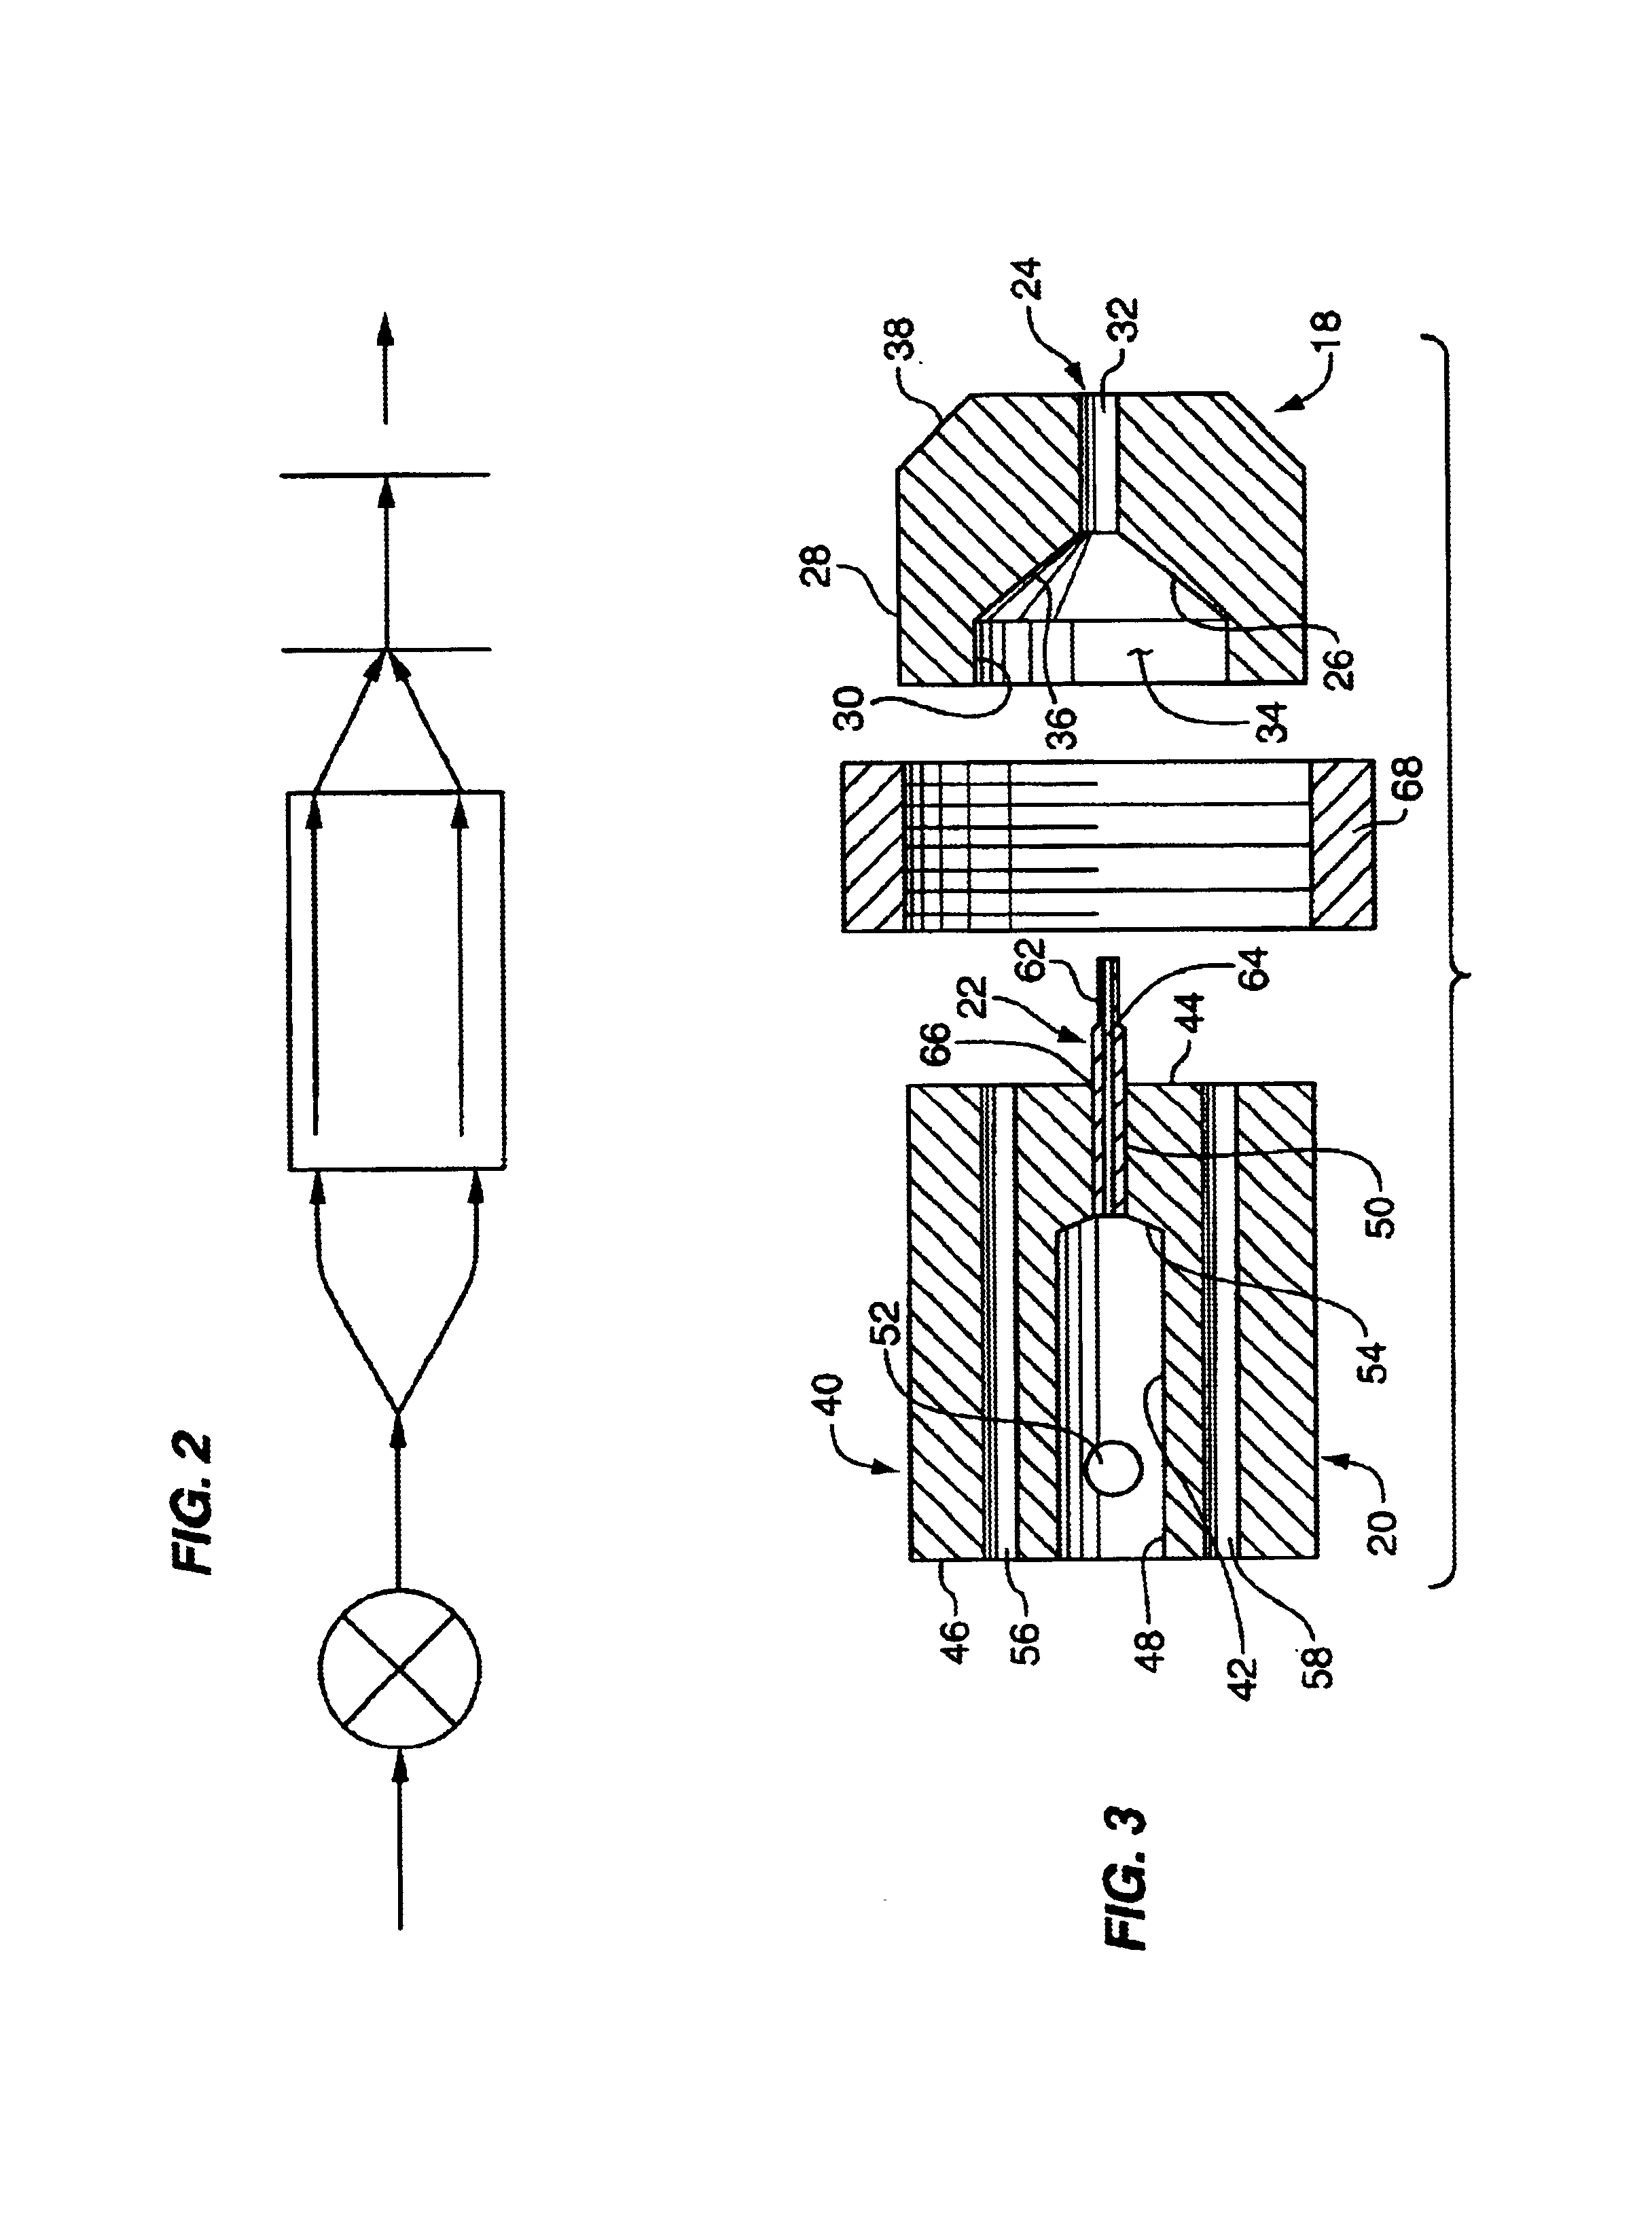 Nozzle for lubricating a workpiece